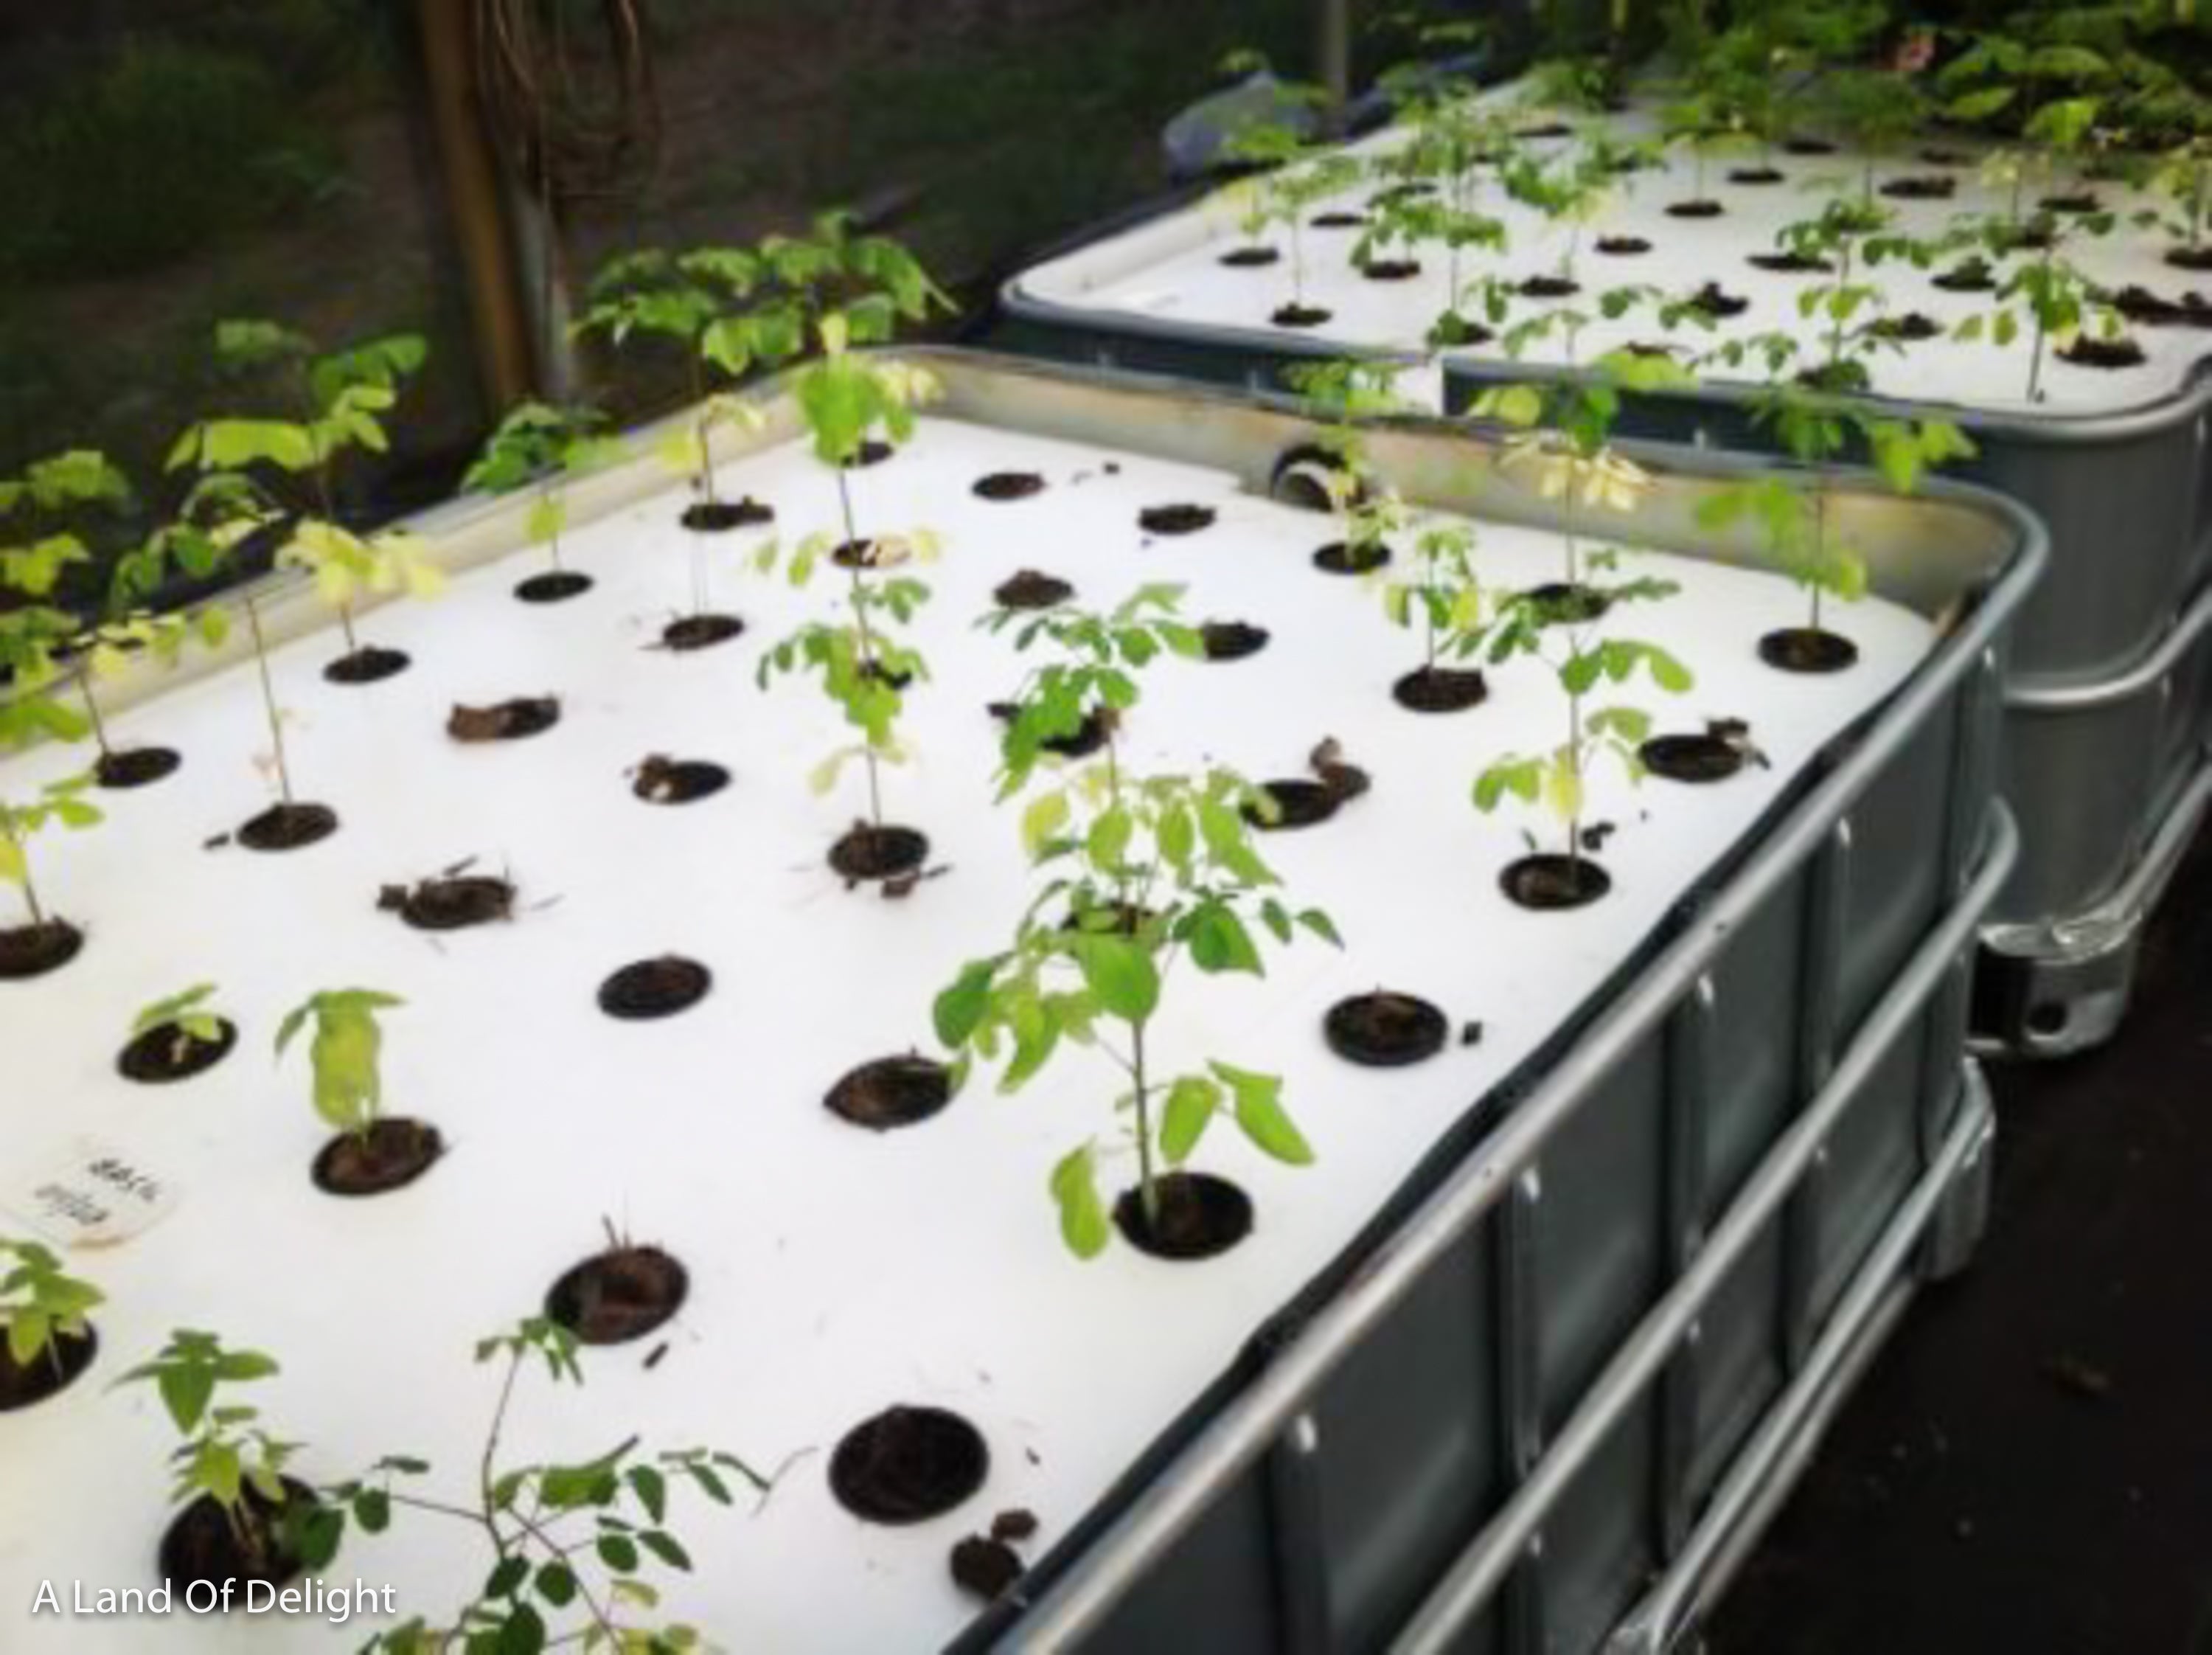 Aquaponics 3-Bed Self Sustaining Garden System with small plants sprouting